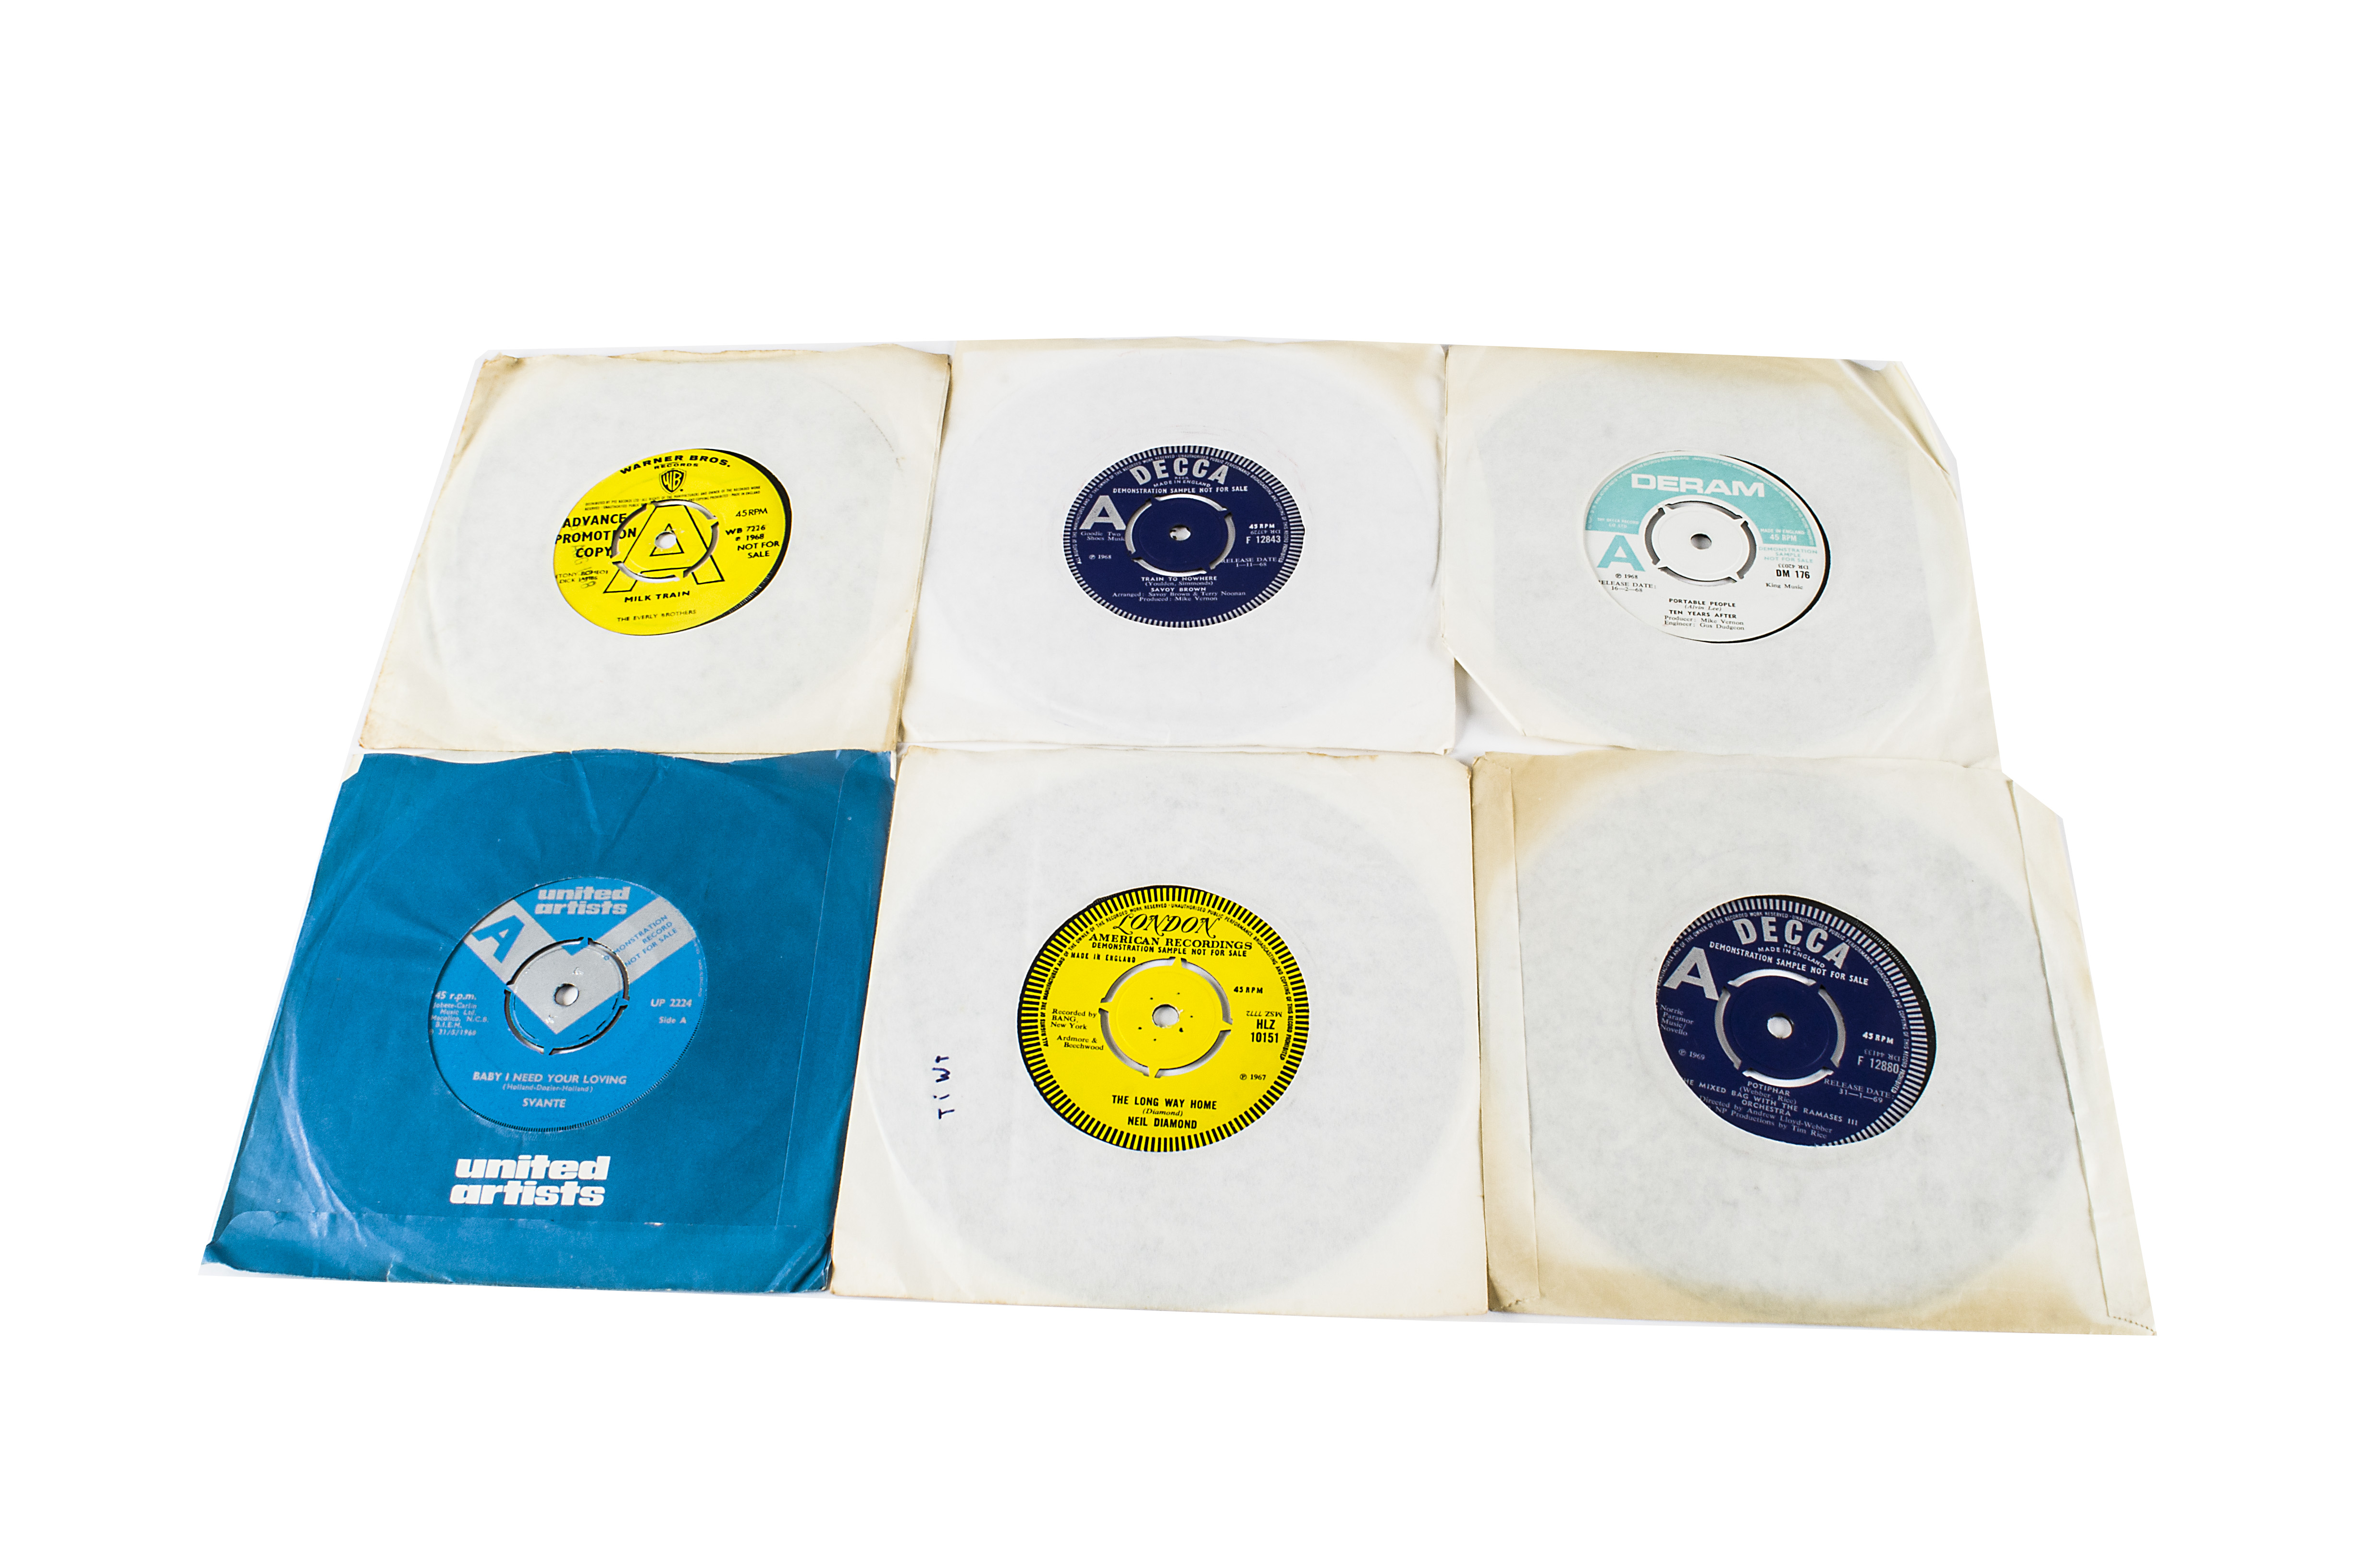 Sixties Demo / Promo 7" Singles, fifteen Demo and Promo 7" singles, mainly from the Sixties with